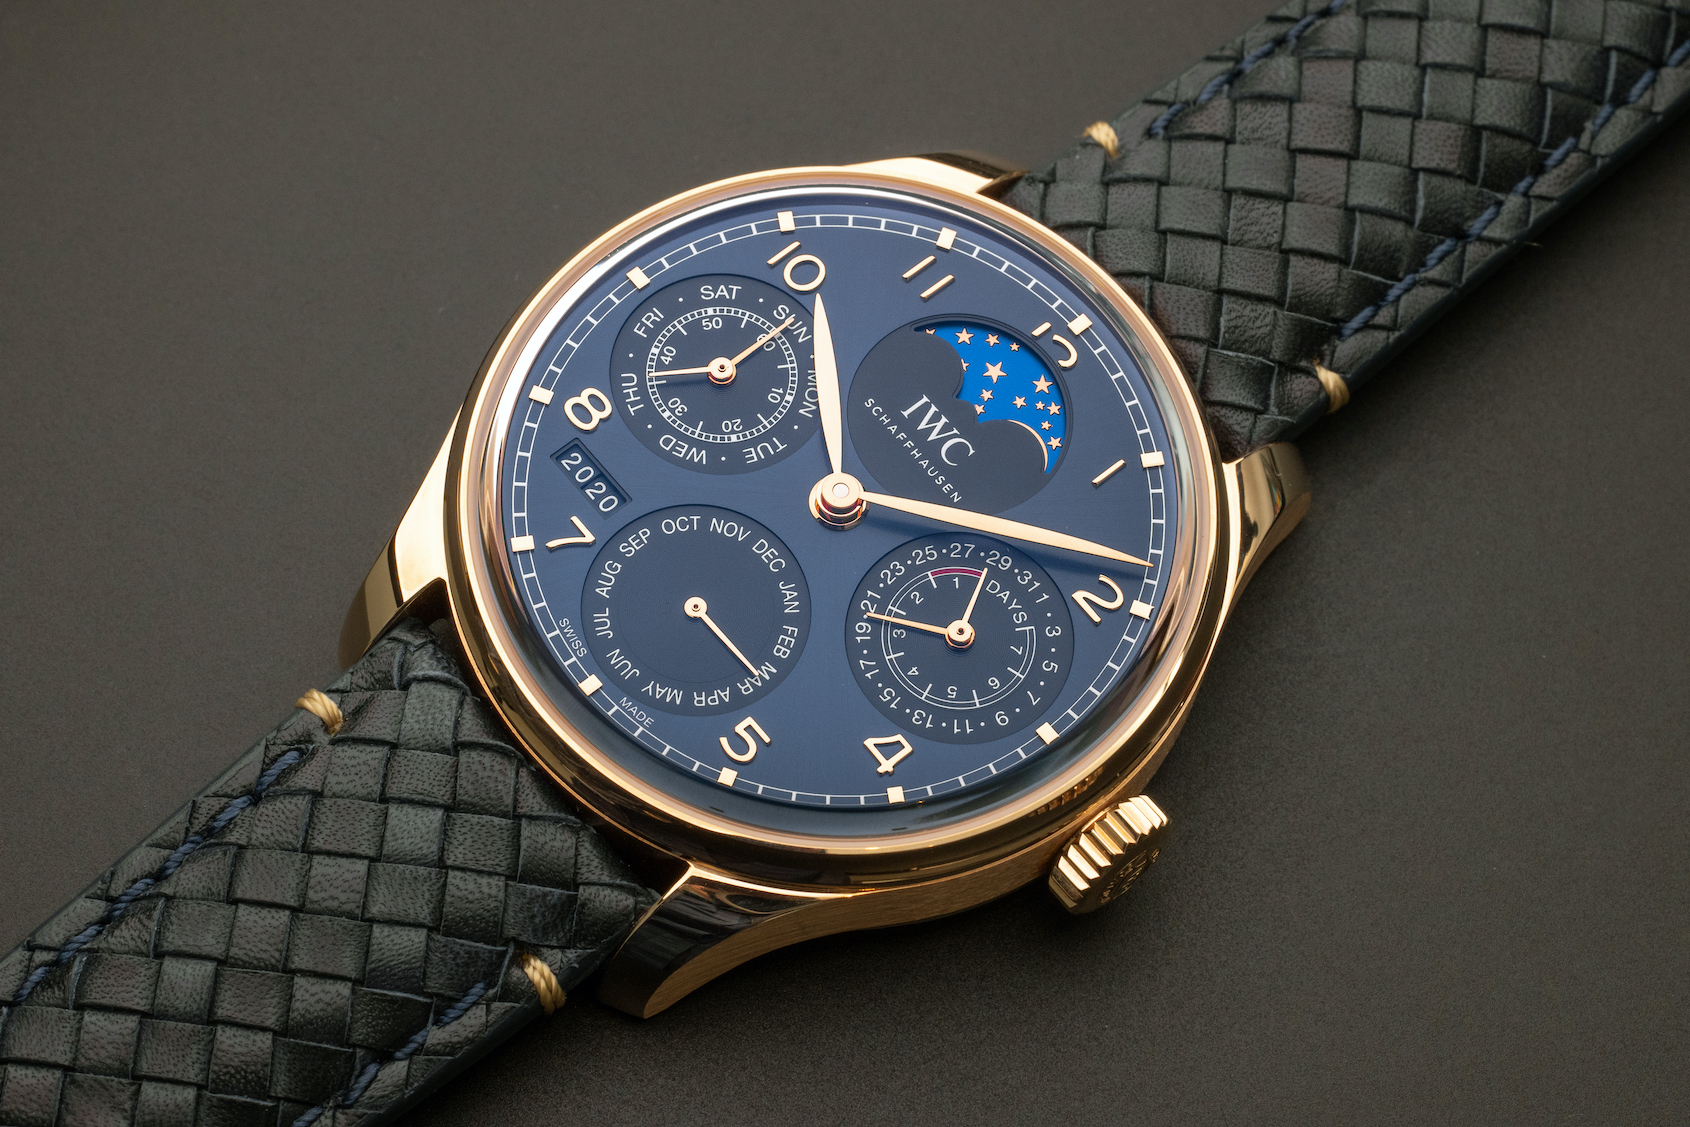 HANDS-ON: The elegance and nuance of the IWC Portugieser 2020 ...